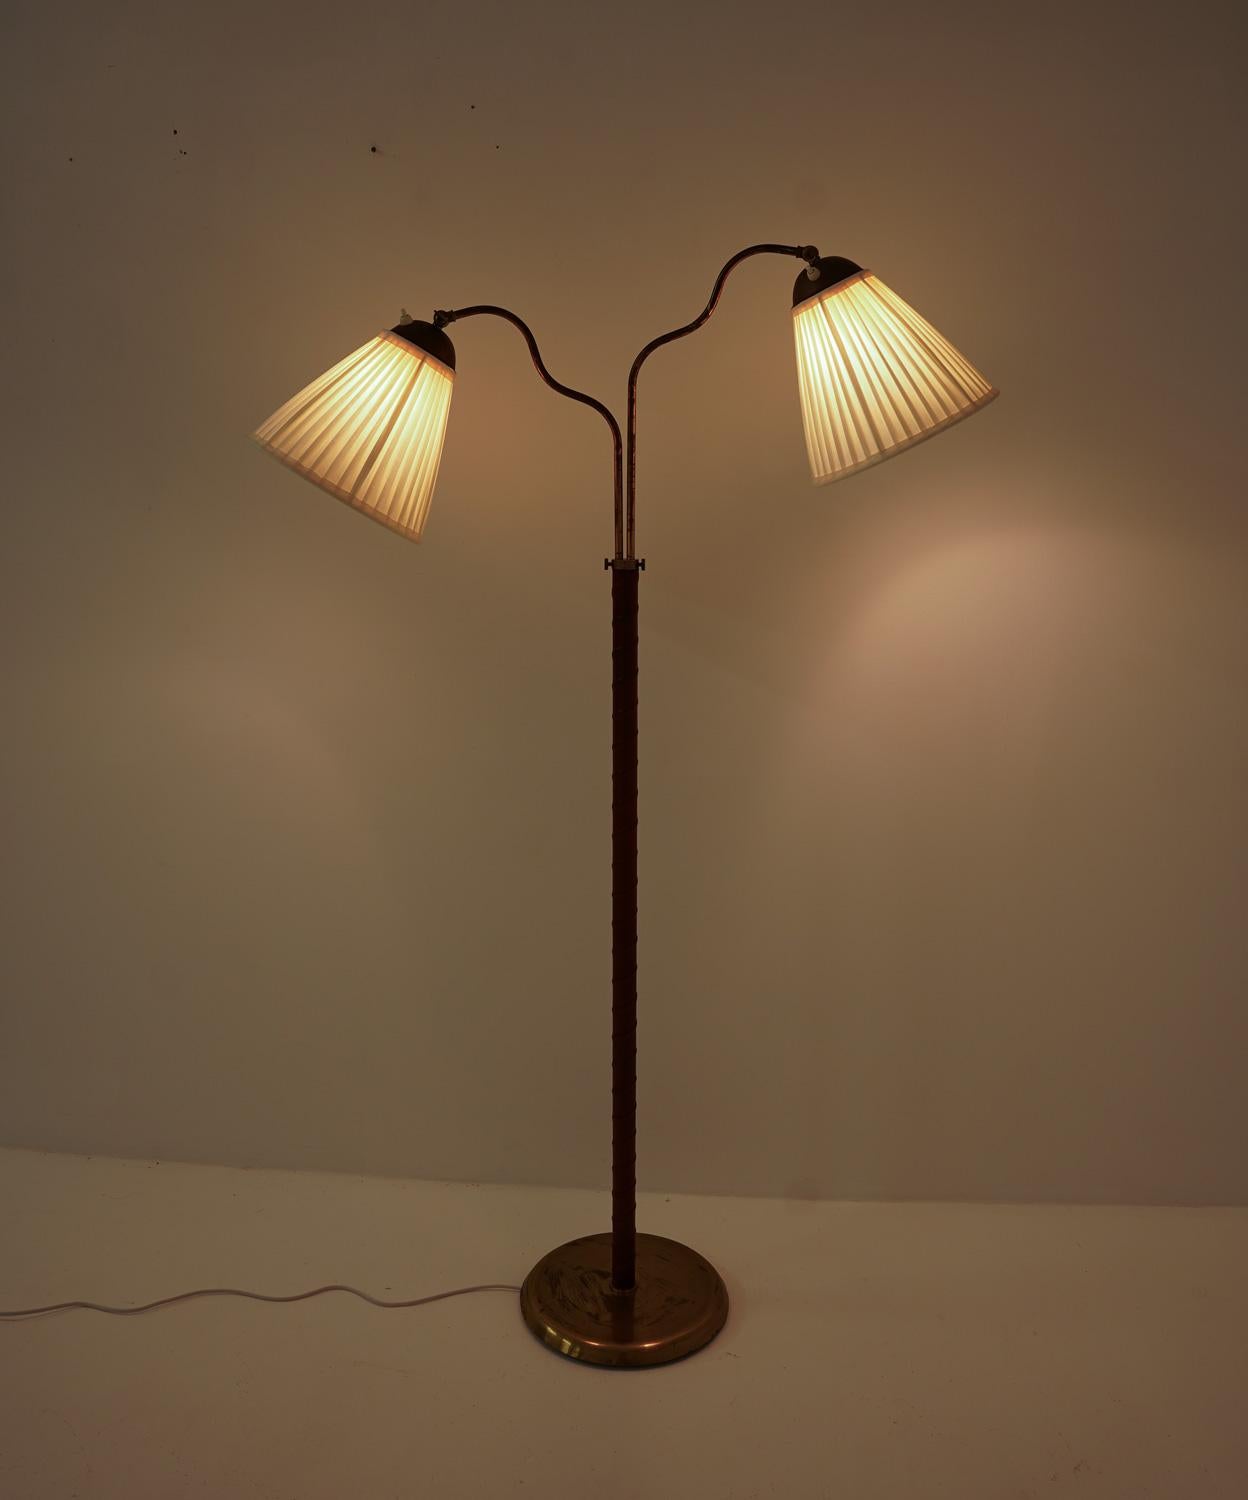 This is a lovely Swedish Modern floor lamp that was manufactured in Sweden during the 1940s. The lamp features a brass covered iron base and a brass rod with leather webbing. The rod supports two swivel arms that hold the shades. The swivel arms are